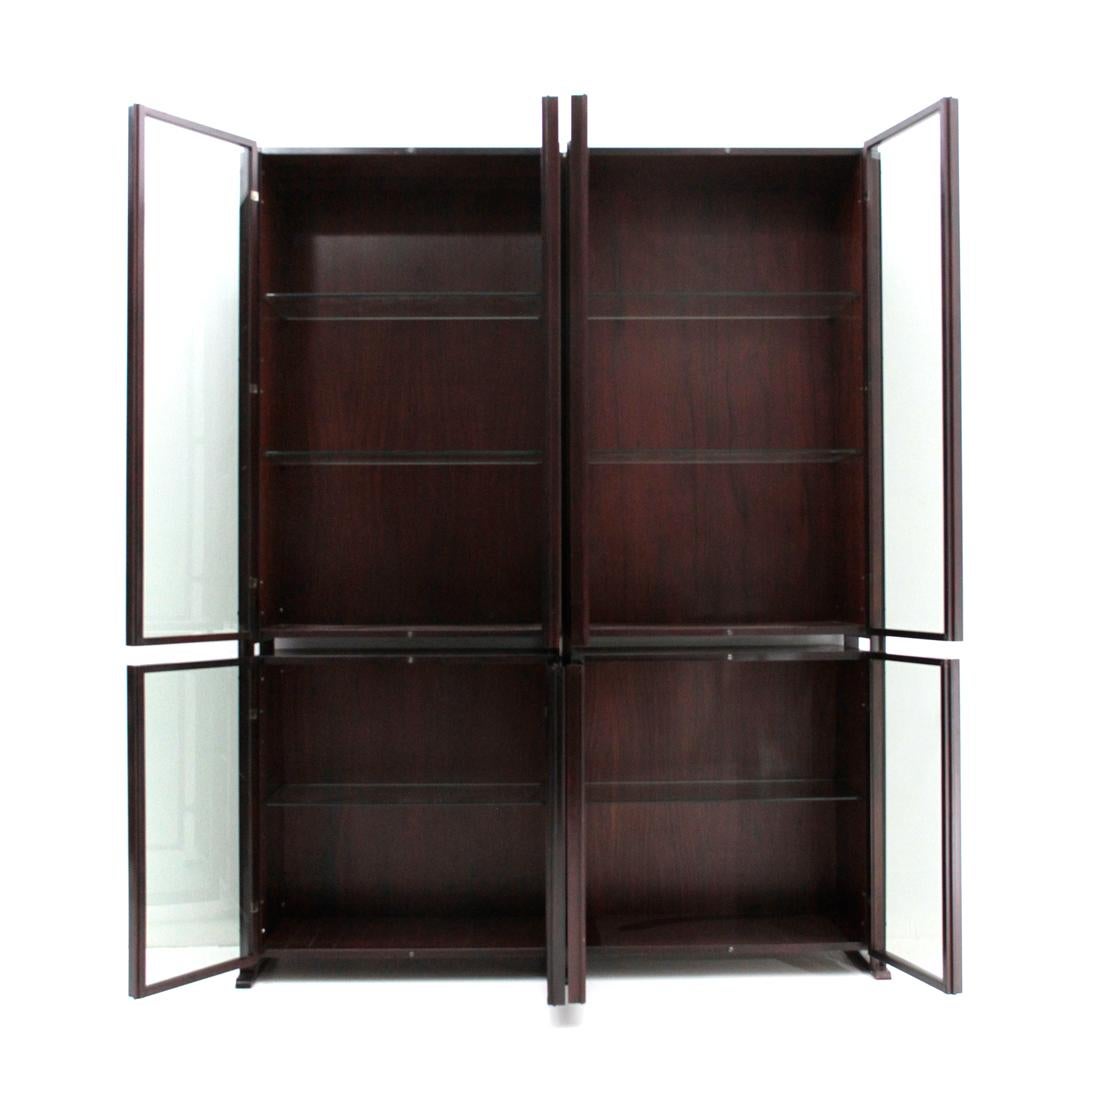 Mid-20th Century Italian Midcentury Wall Unit by Gianni Songia for Sormani, 1960s